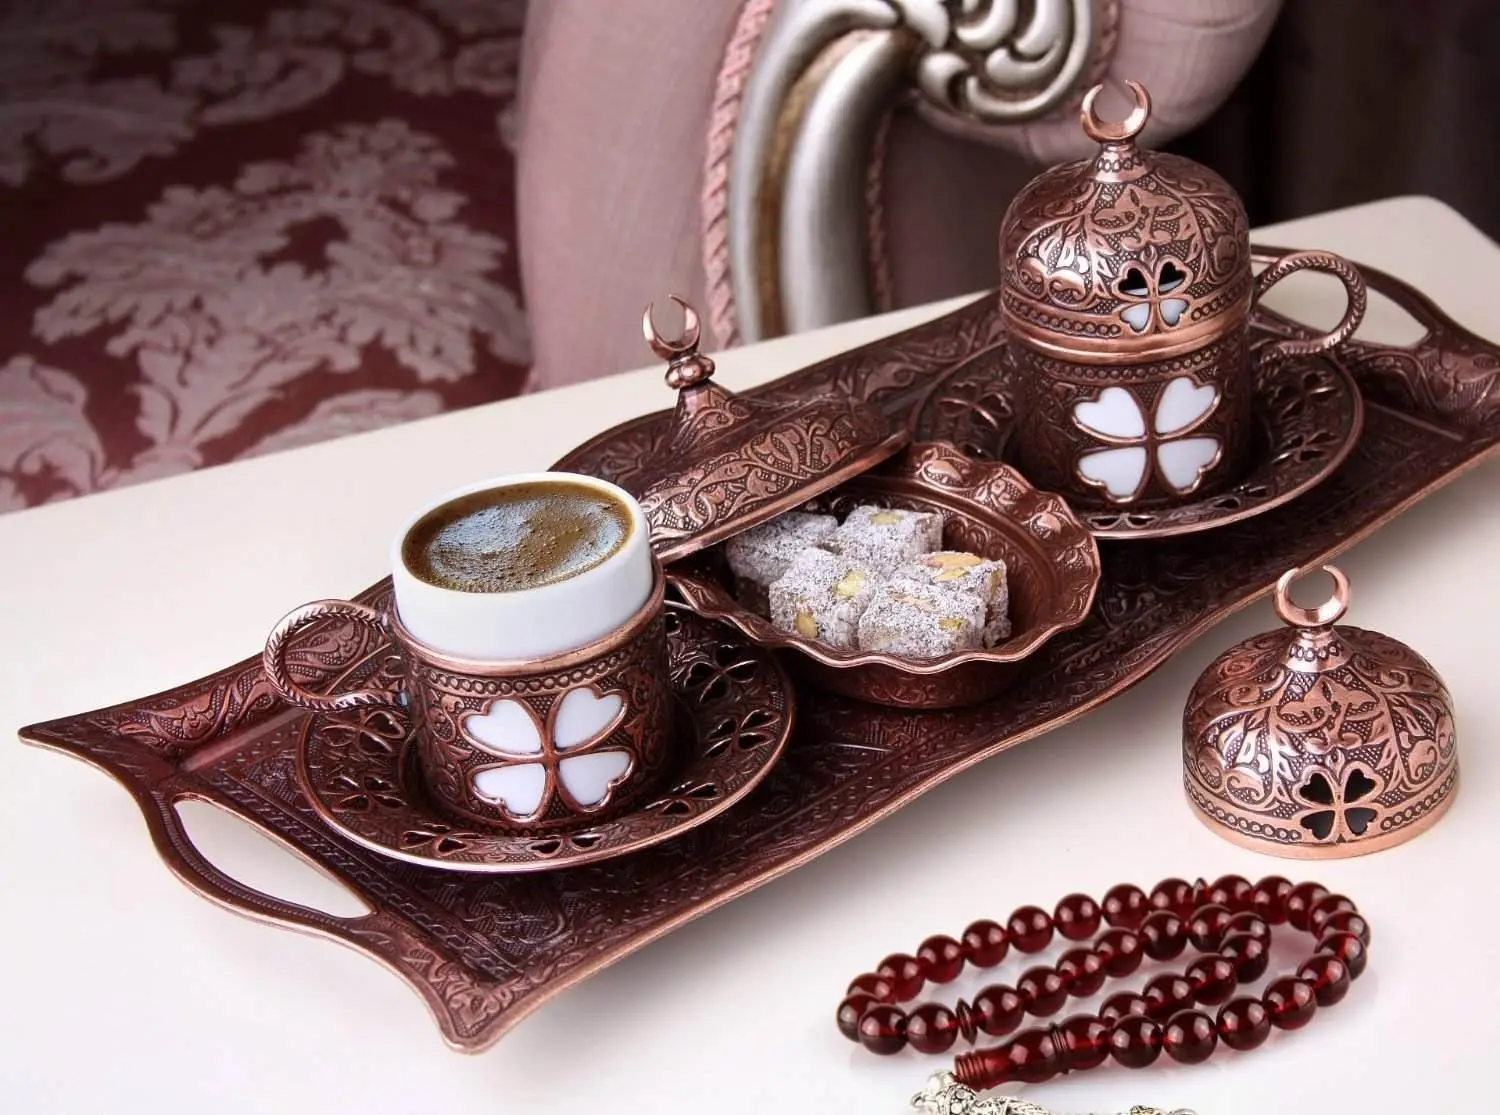 

Pieces Turkish Greek Arabic Making Serving Gift Set with Copper Pot Maker, Cups Saucers, Tray, Sugar Bowl & 6.6 Oz